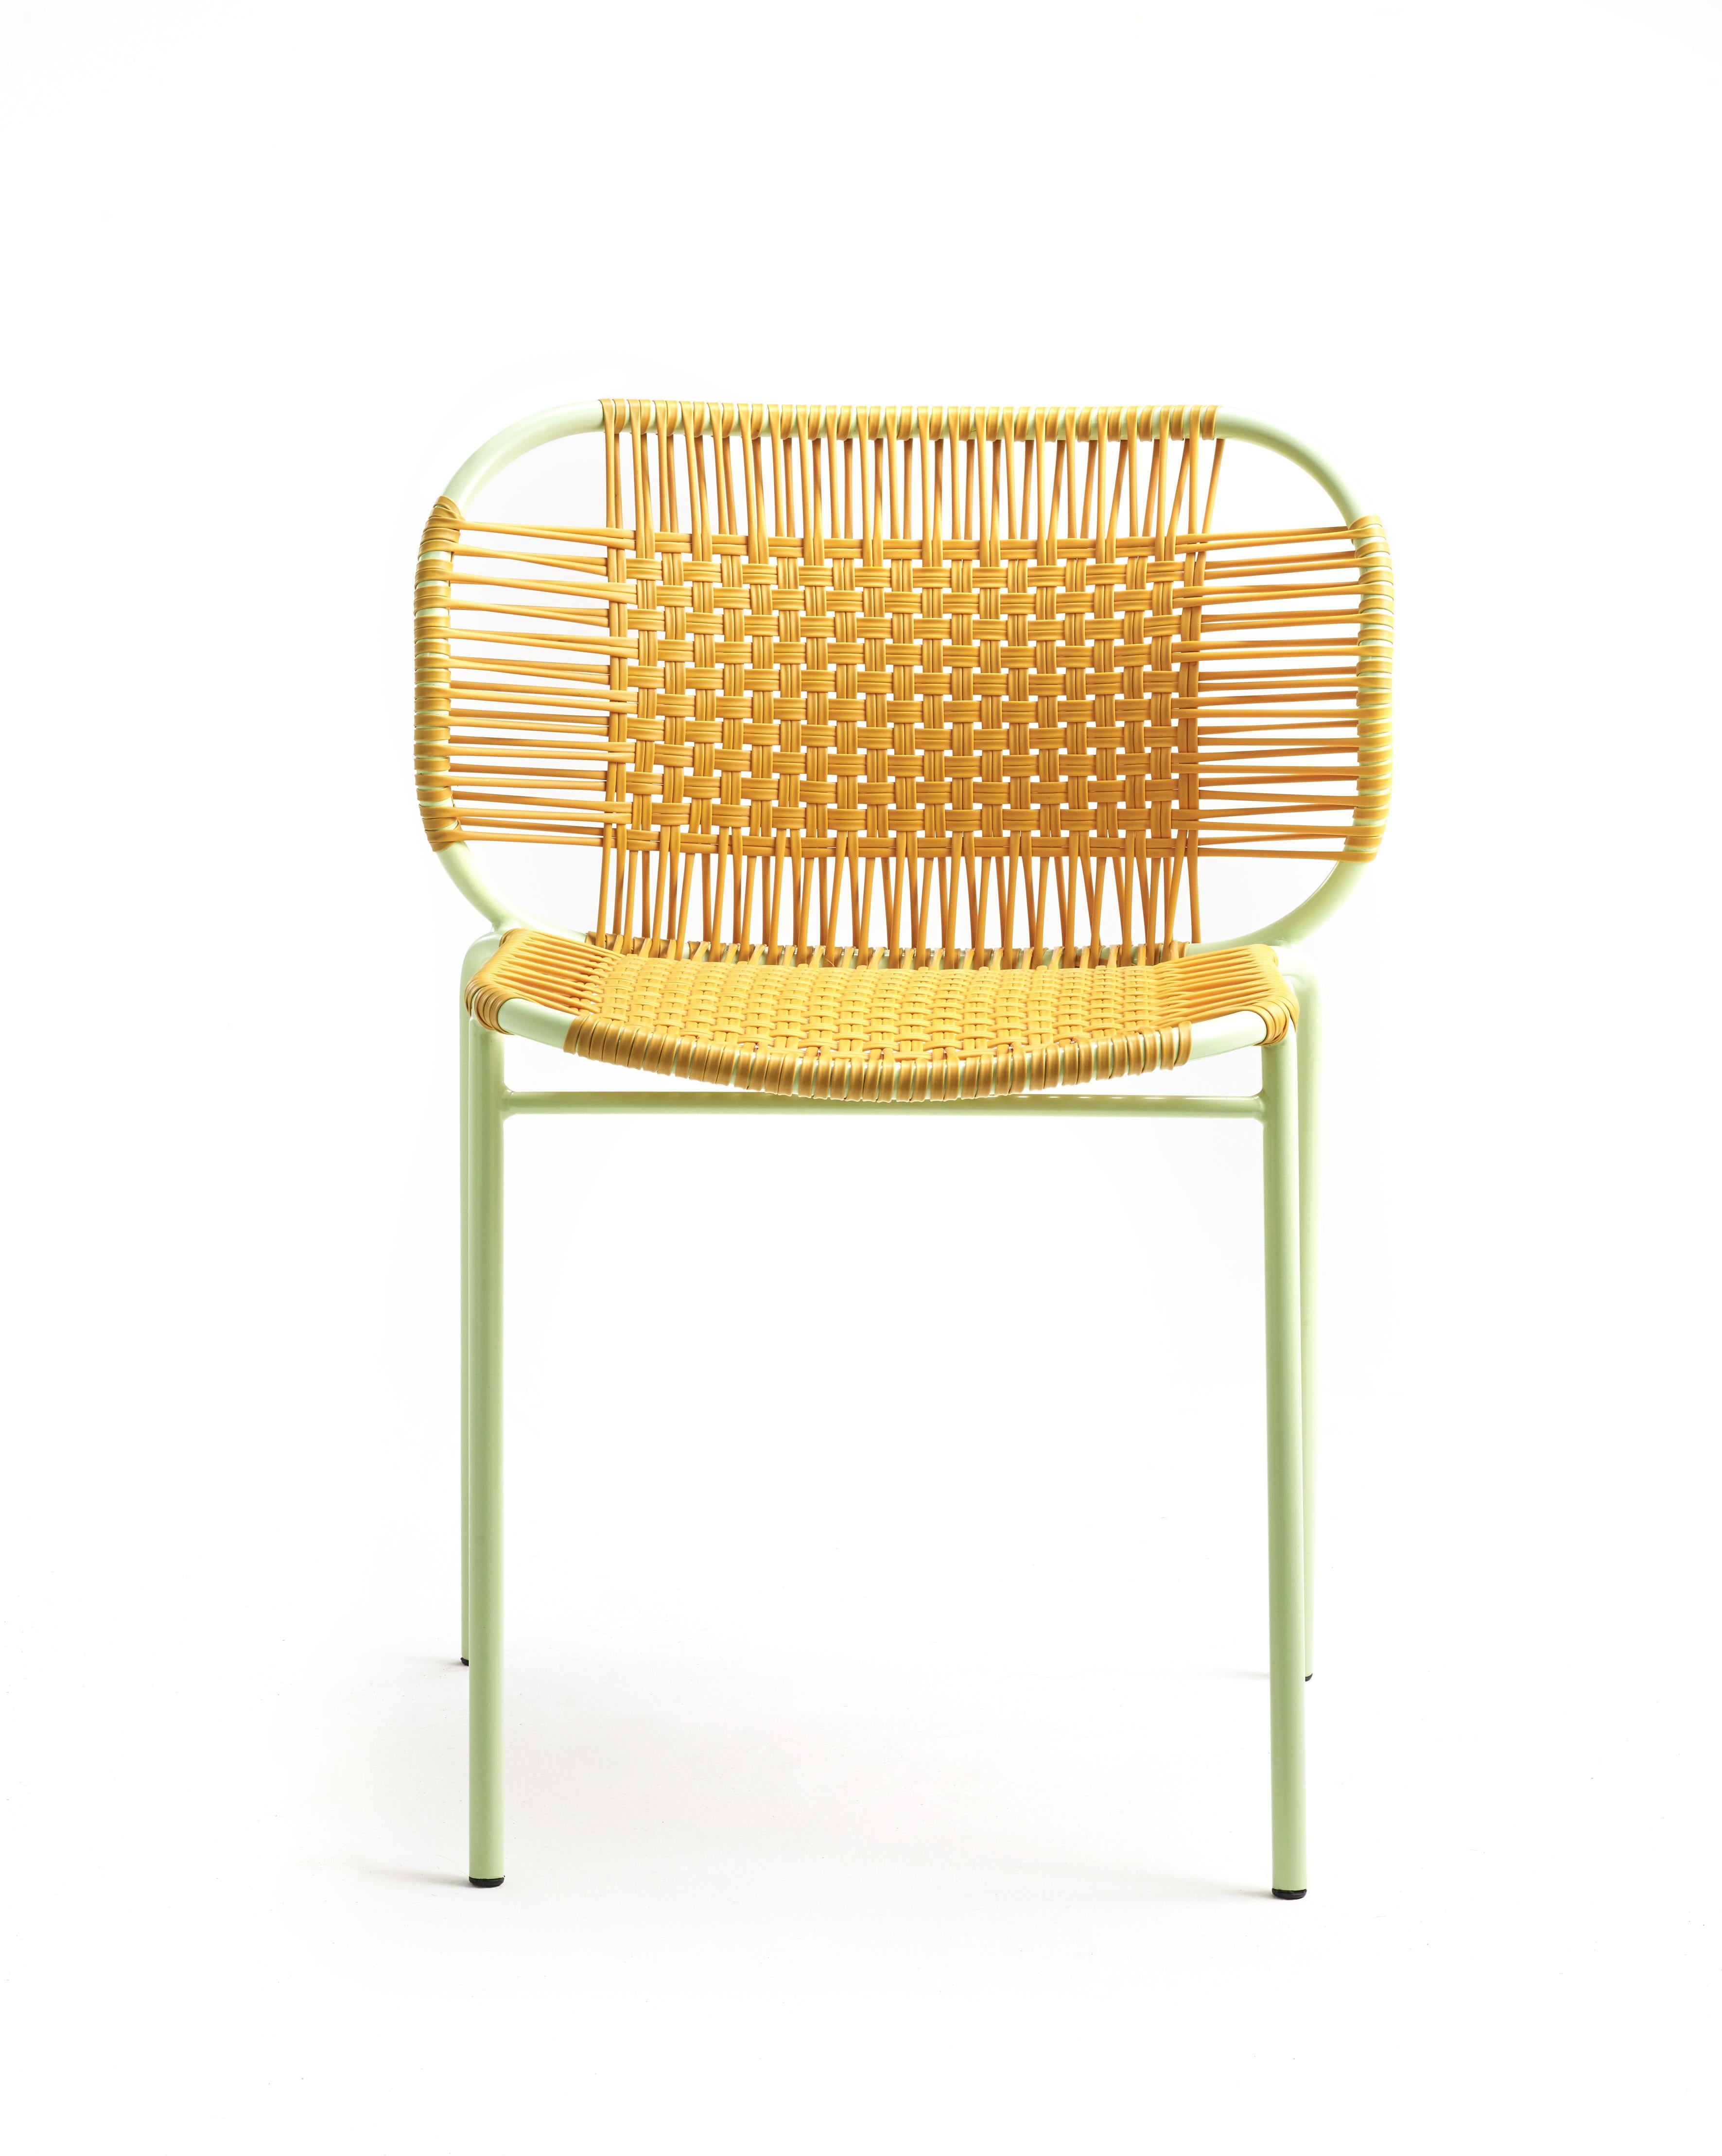 Honey Cielo stacking chair by Sebastian Herkner
Materials: PVC strings, powder-coated steel frame. 
Technique: Made from recycled plastic and weaved by local craftspeople in Cartagena, Colombia. 
Dimensions: W 56 x D 51.4 x H 78 cm 
Also